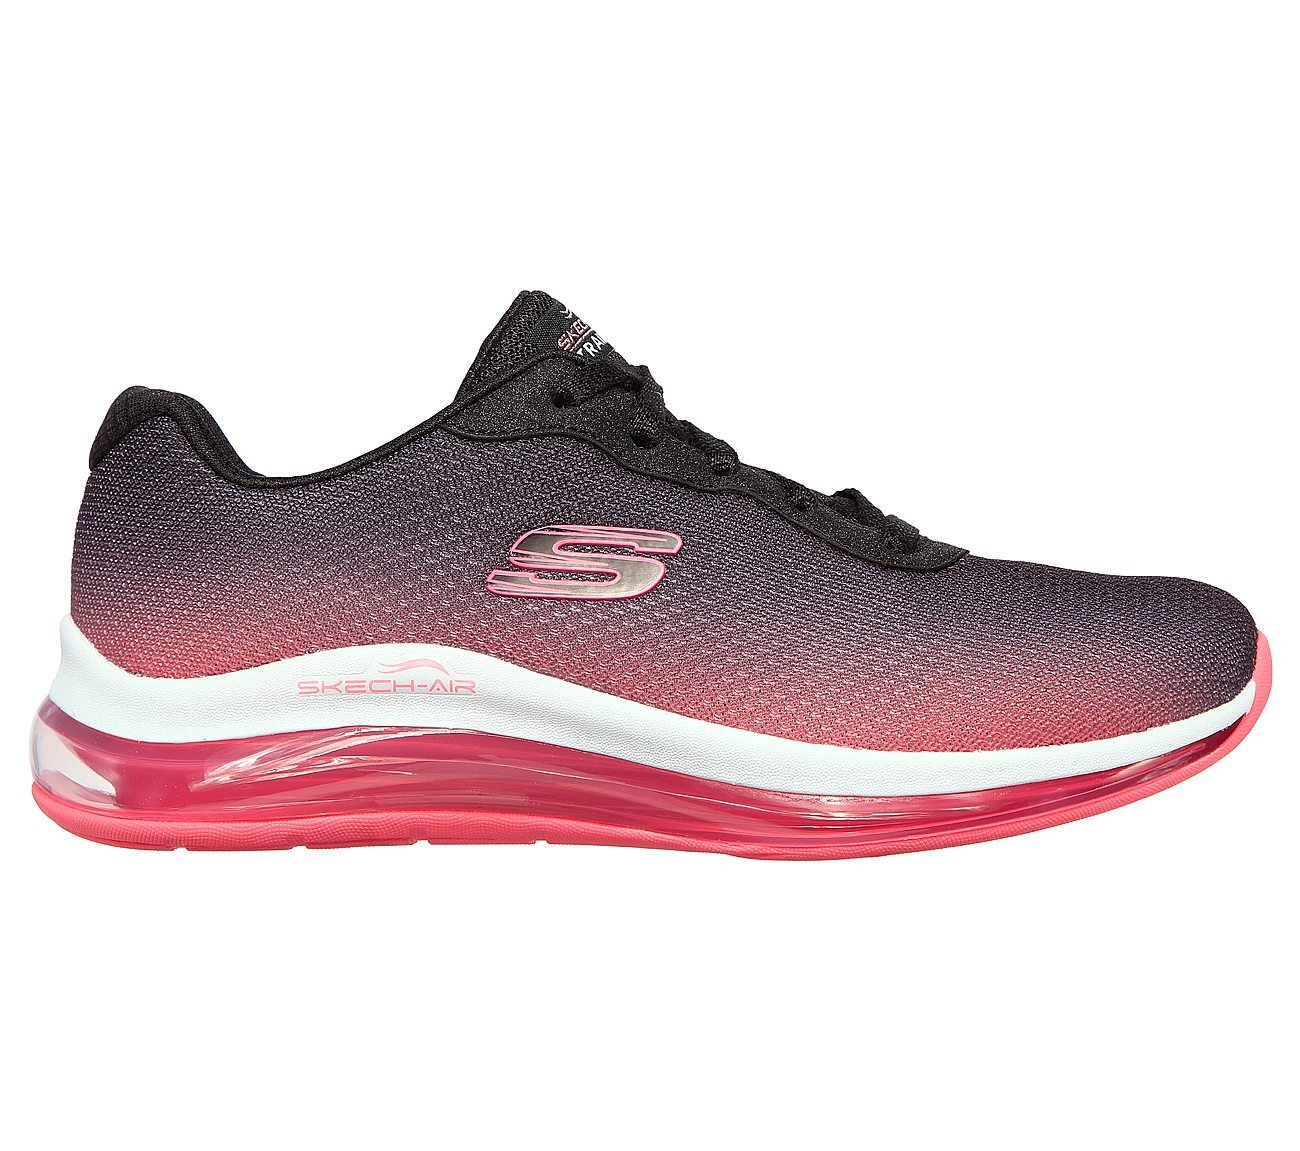 SKECH-AIR ELEMENT 2, BLACK/HOT PINK Footwear Lateral View